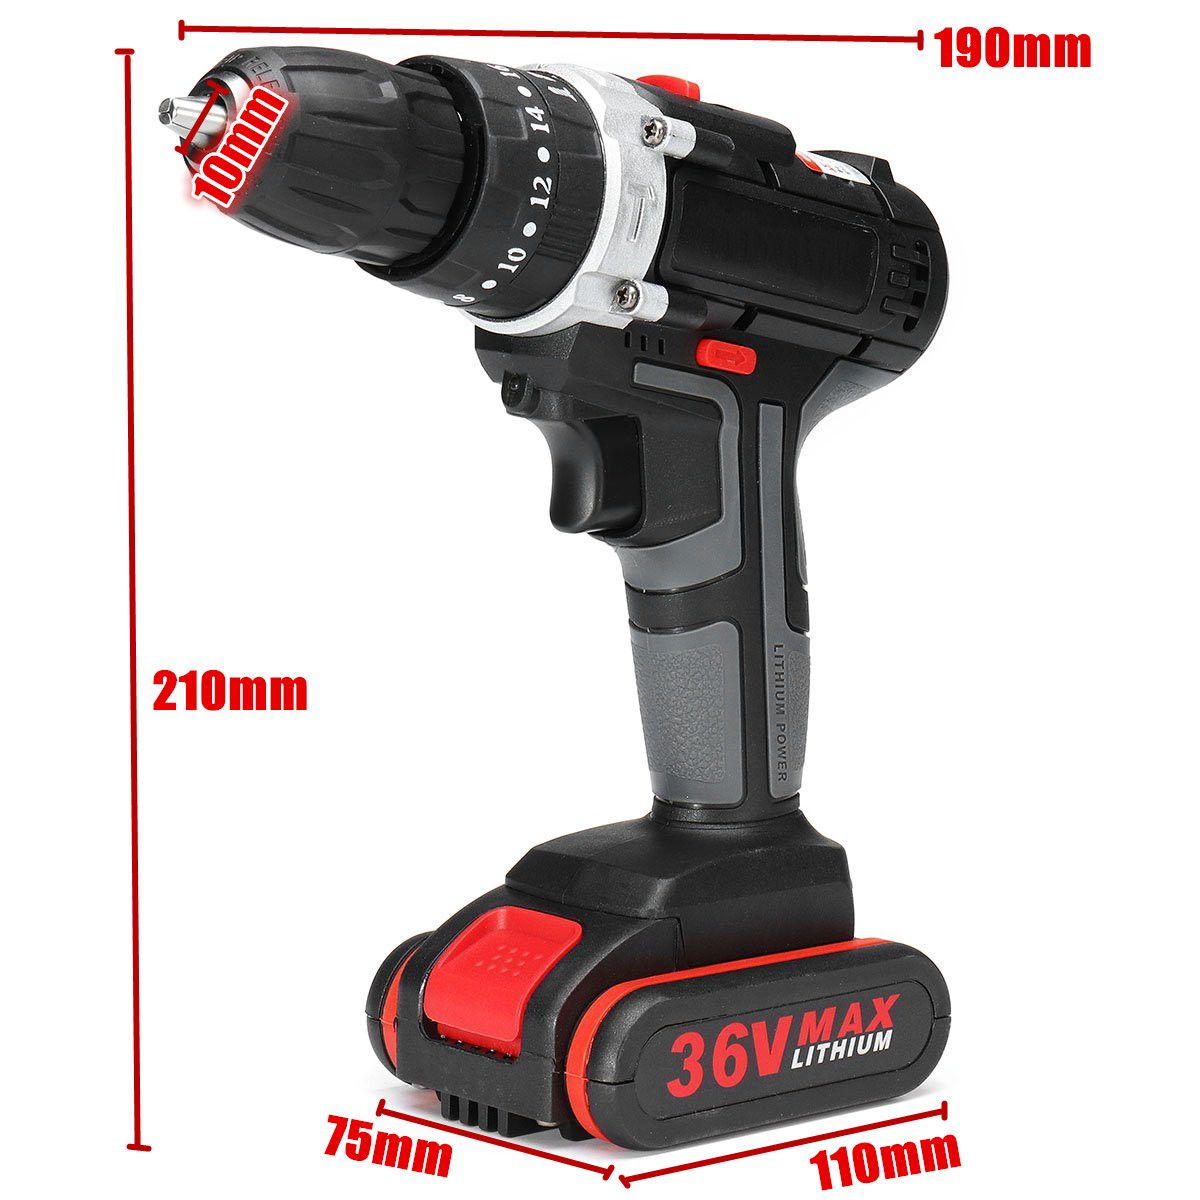 36V-Cordless-Lithium-Electric-Drill-Impact-Power-Drills-28Nm-3000mAh-183-Torque-Stage-Drill-Tools-1404353